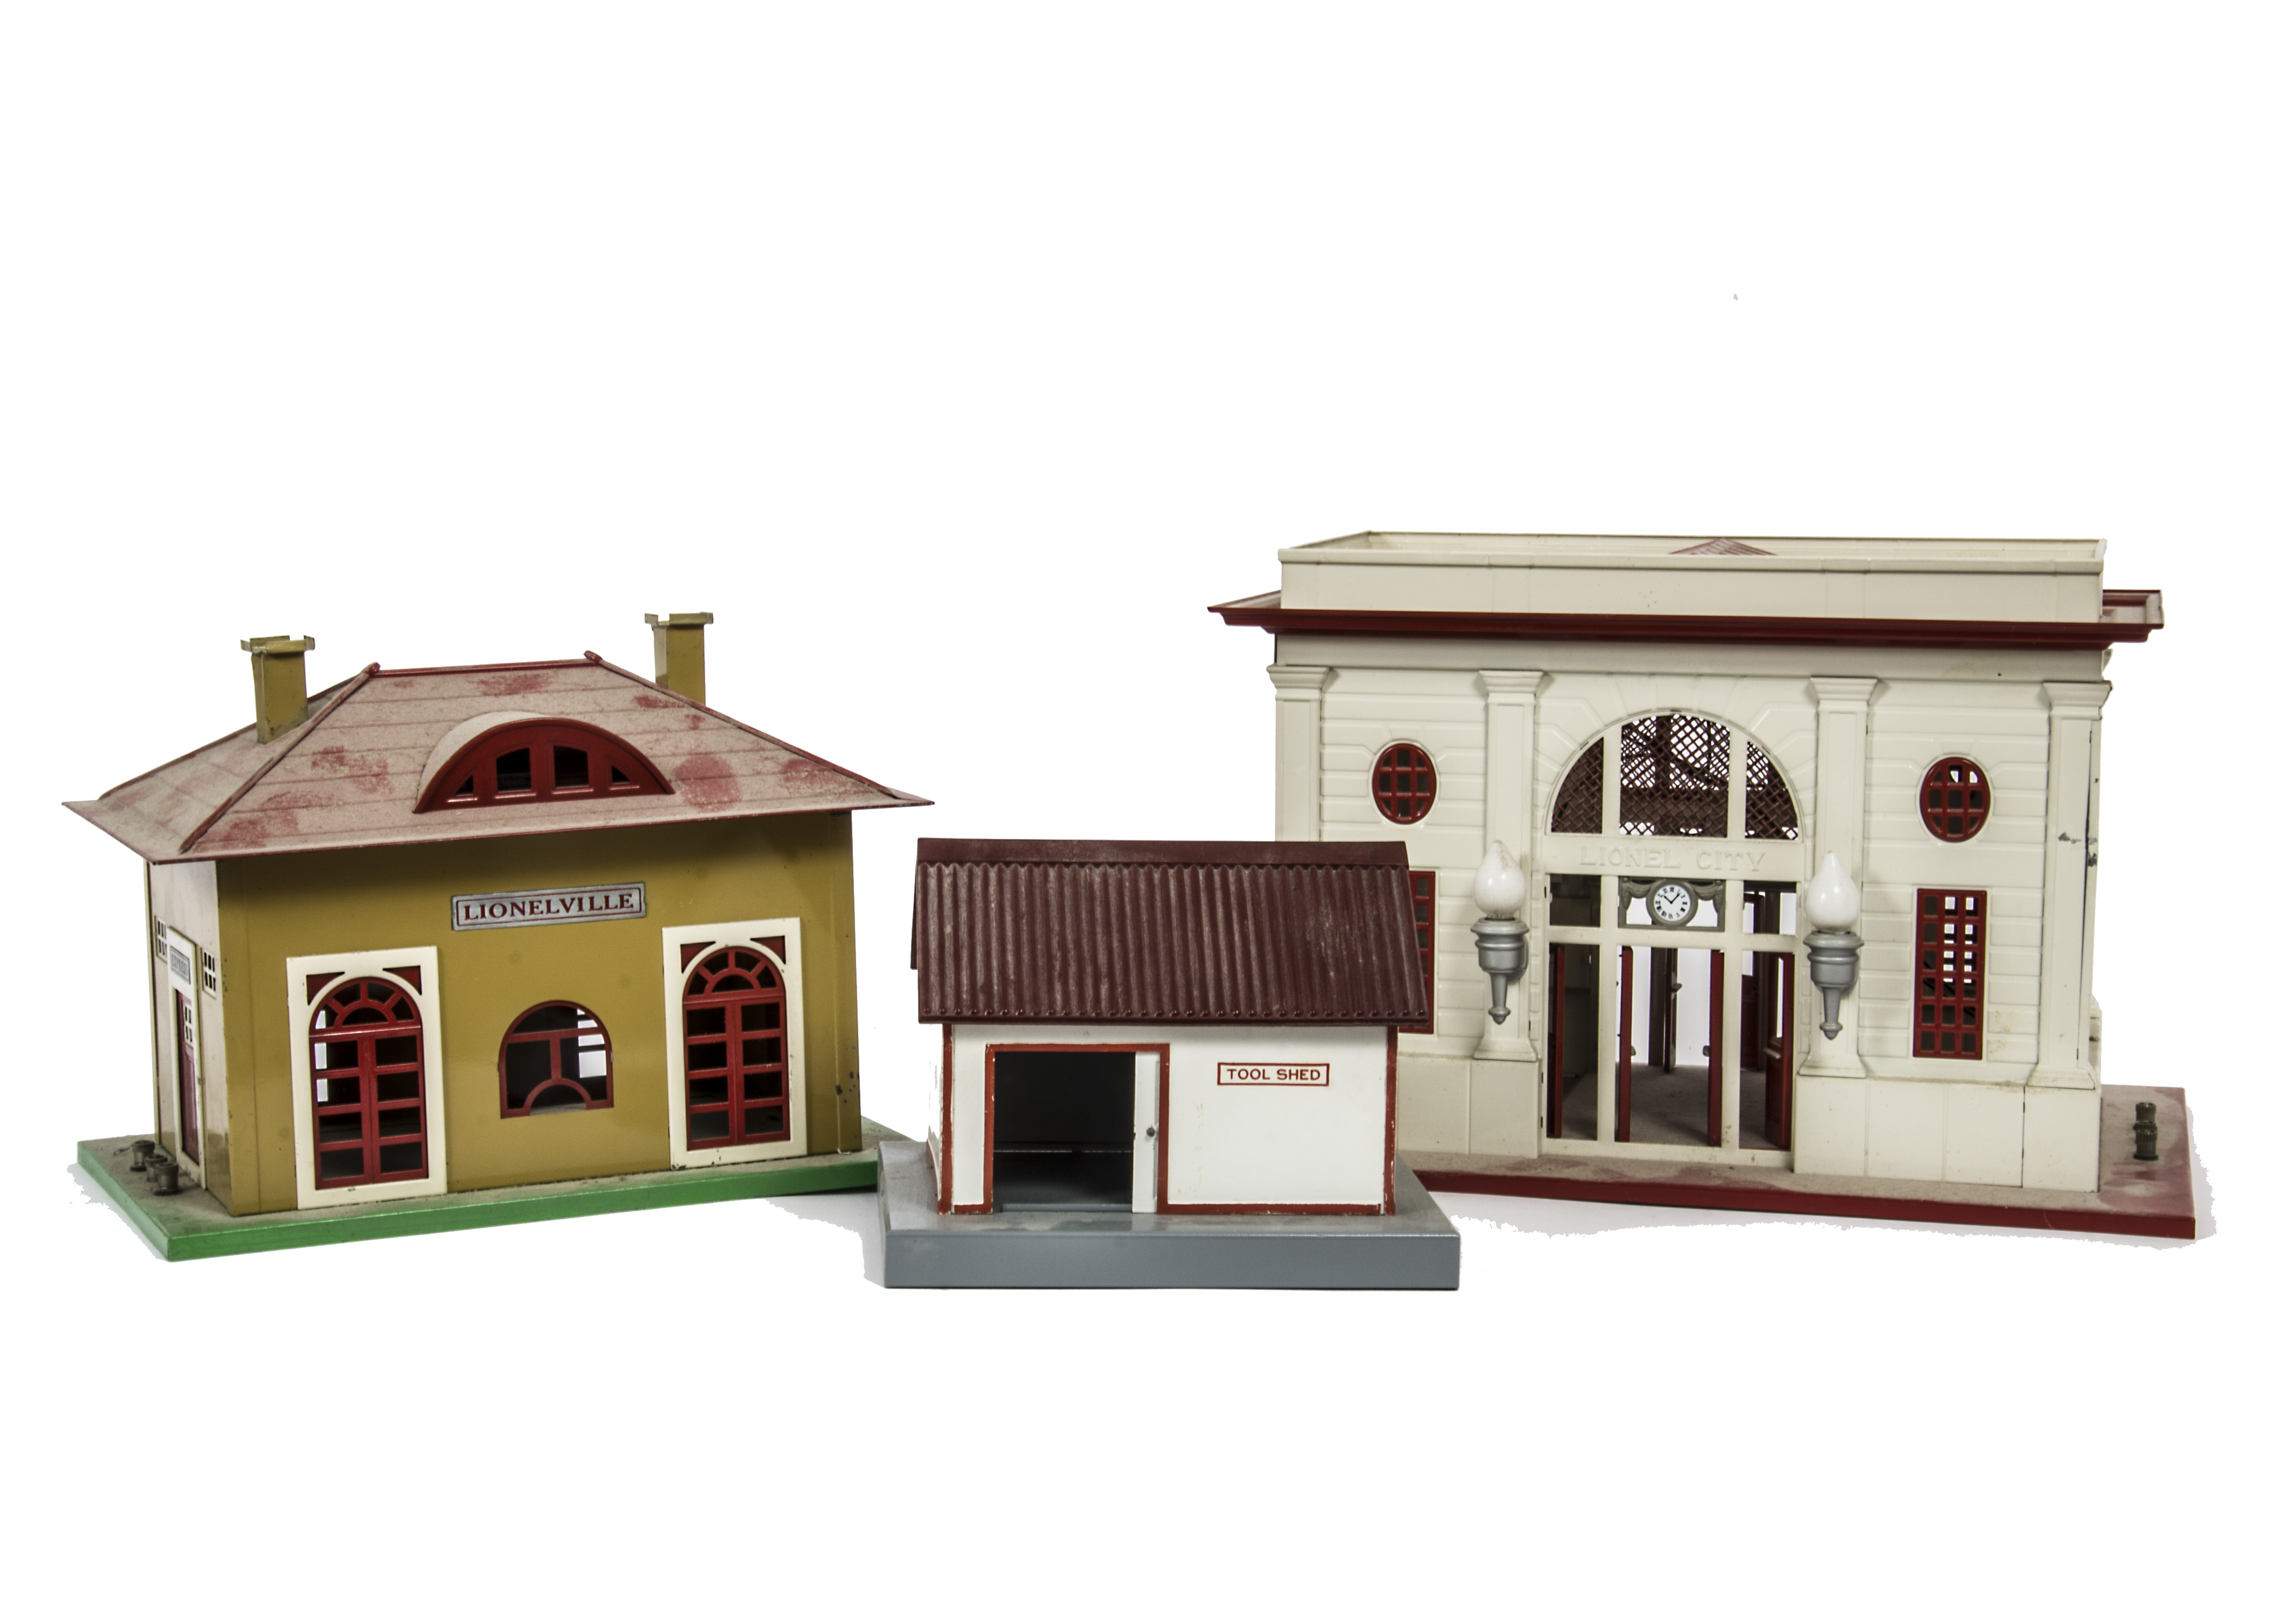 Lionel MTH and Gilbert American Large-scale Railroad Buildings, for 0 Gauge or larger, including